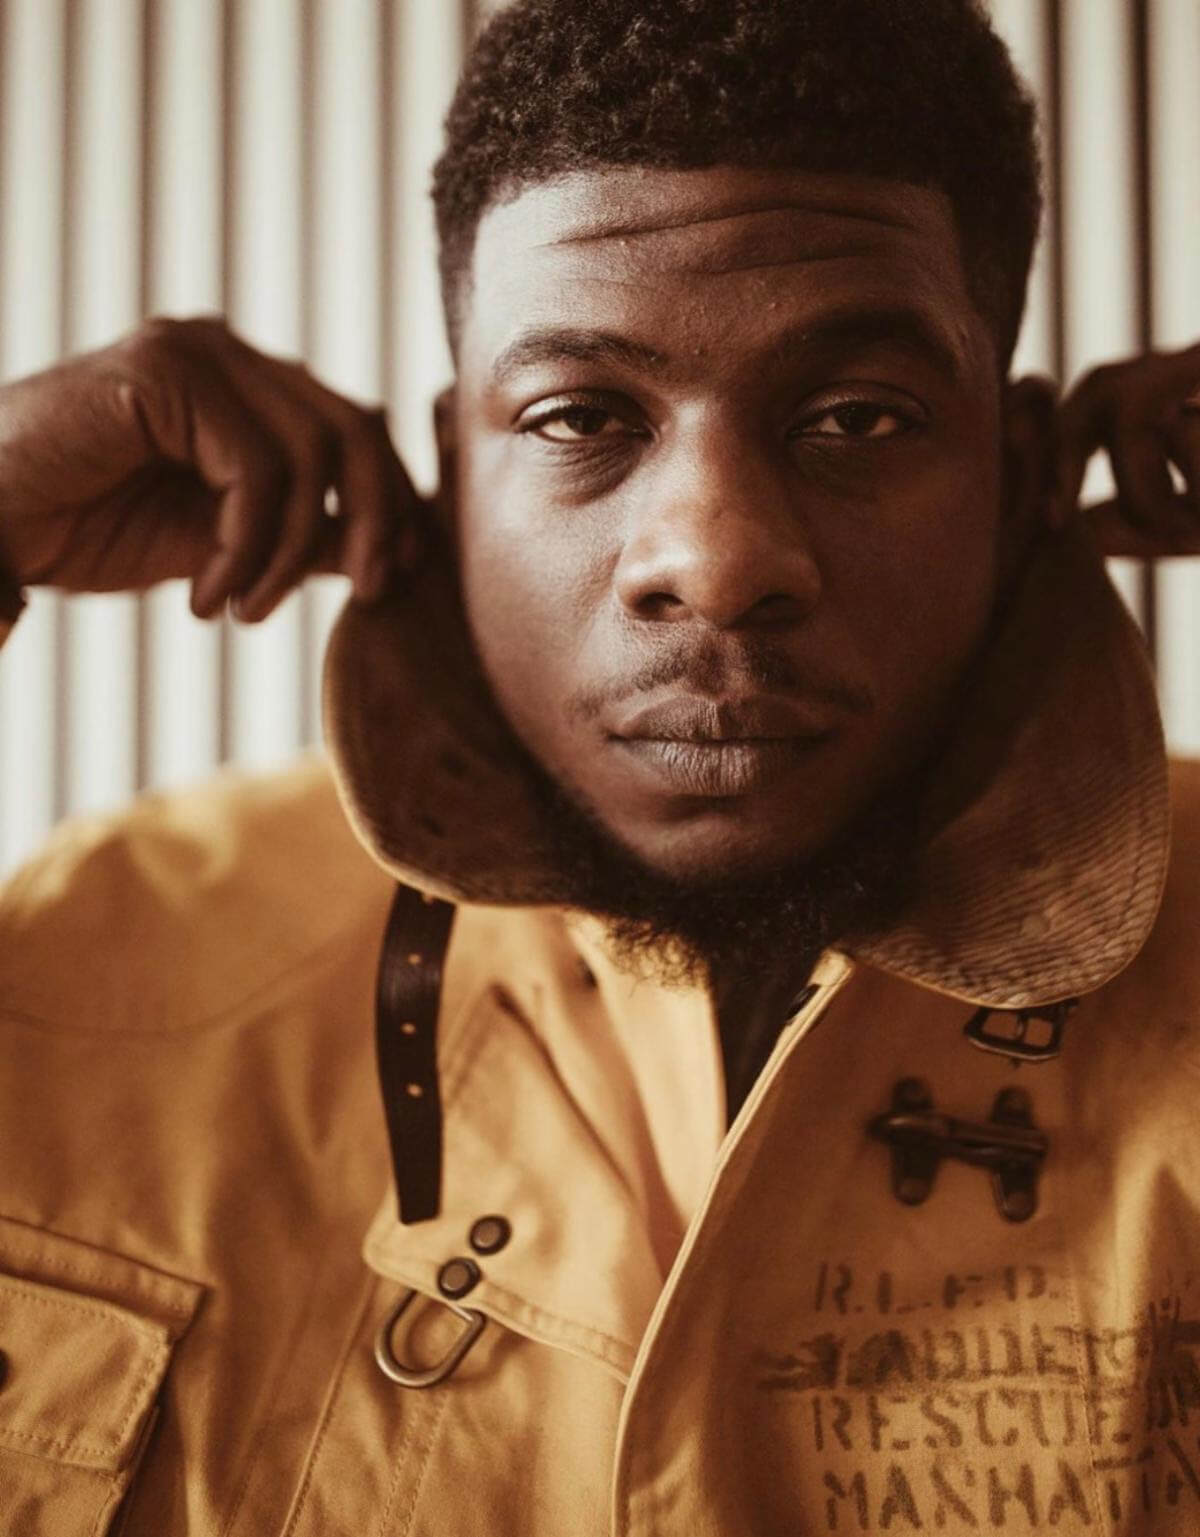 Mick Jenkins, has shared the new Monte Booker-produced track "Truffles." The song is accompanied with a visual directed by Andre Muir